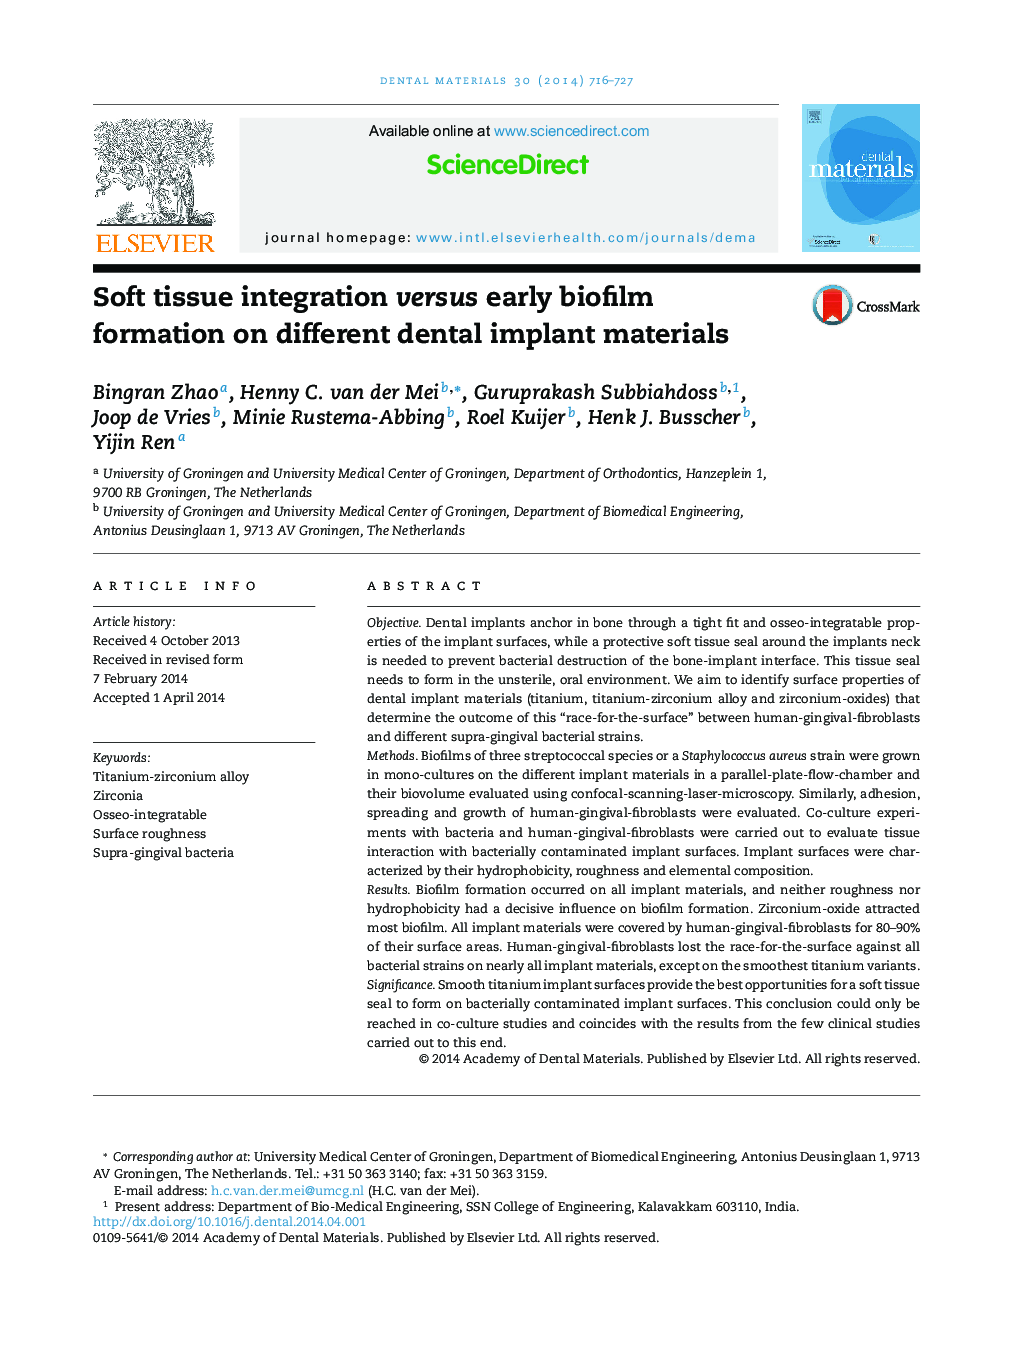 Soft tissue integration versus early biofilm formation on different dental implant materials